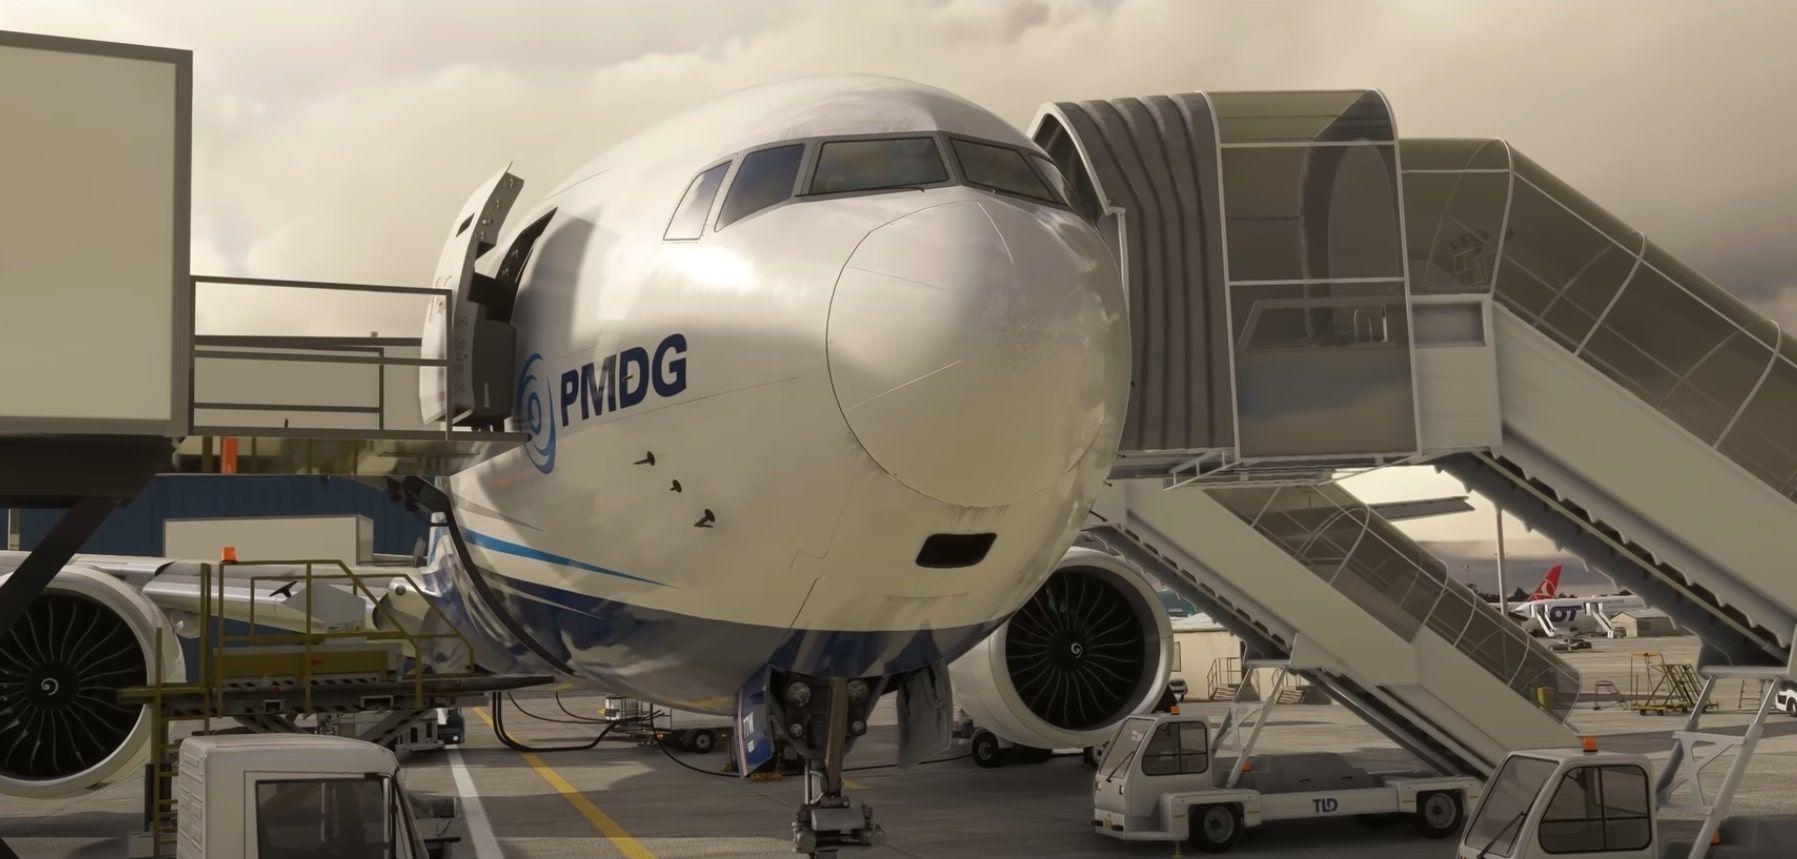 A First Look at PMDG's Boeing 777-300ER for Microsoft Flight Simulator